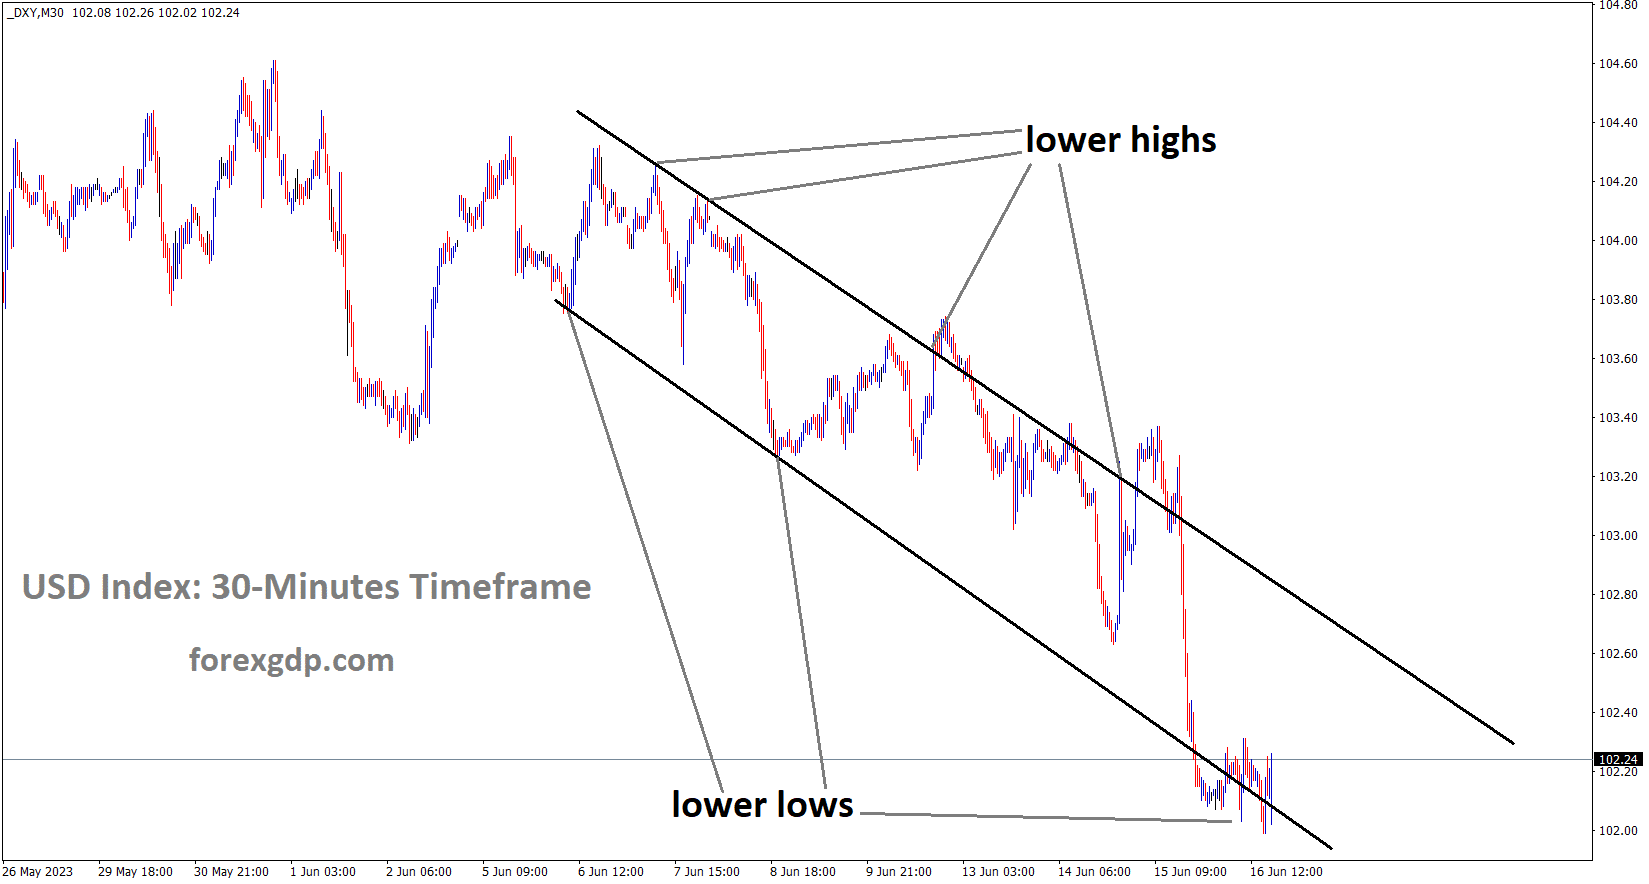 DXY US Dollar index is moving in the Descending channel and the market has reached the lower low area of the channel